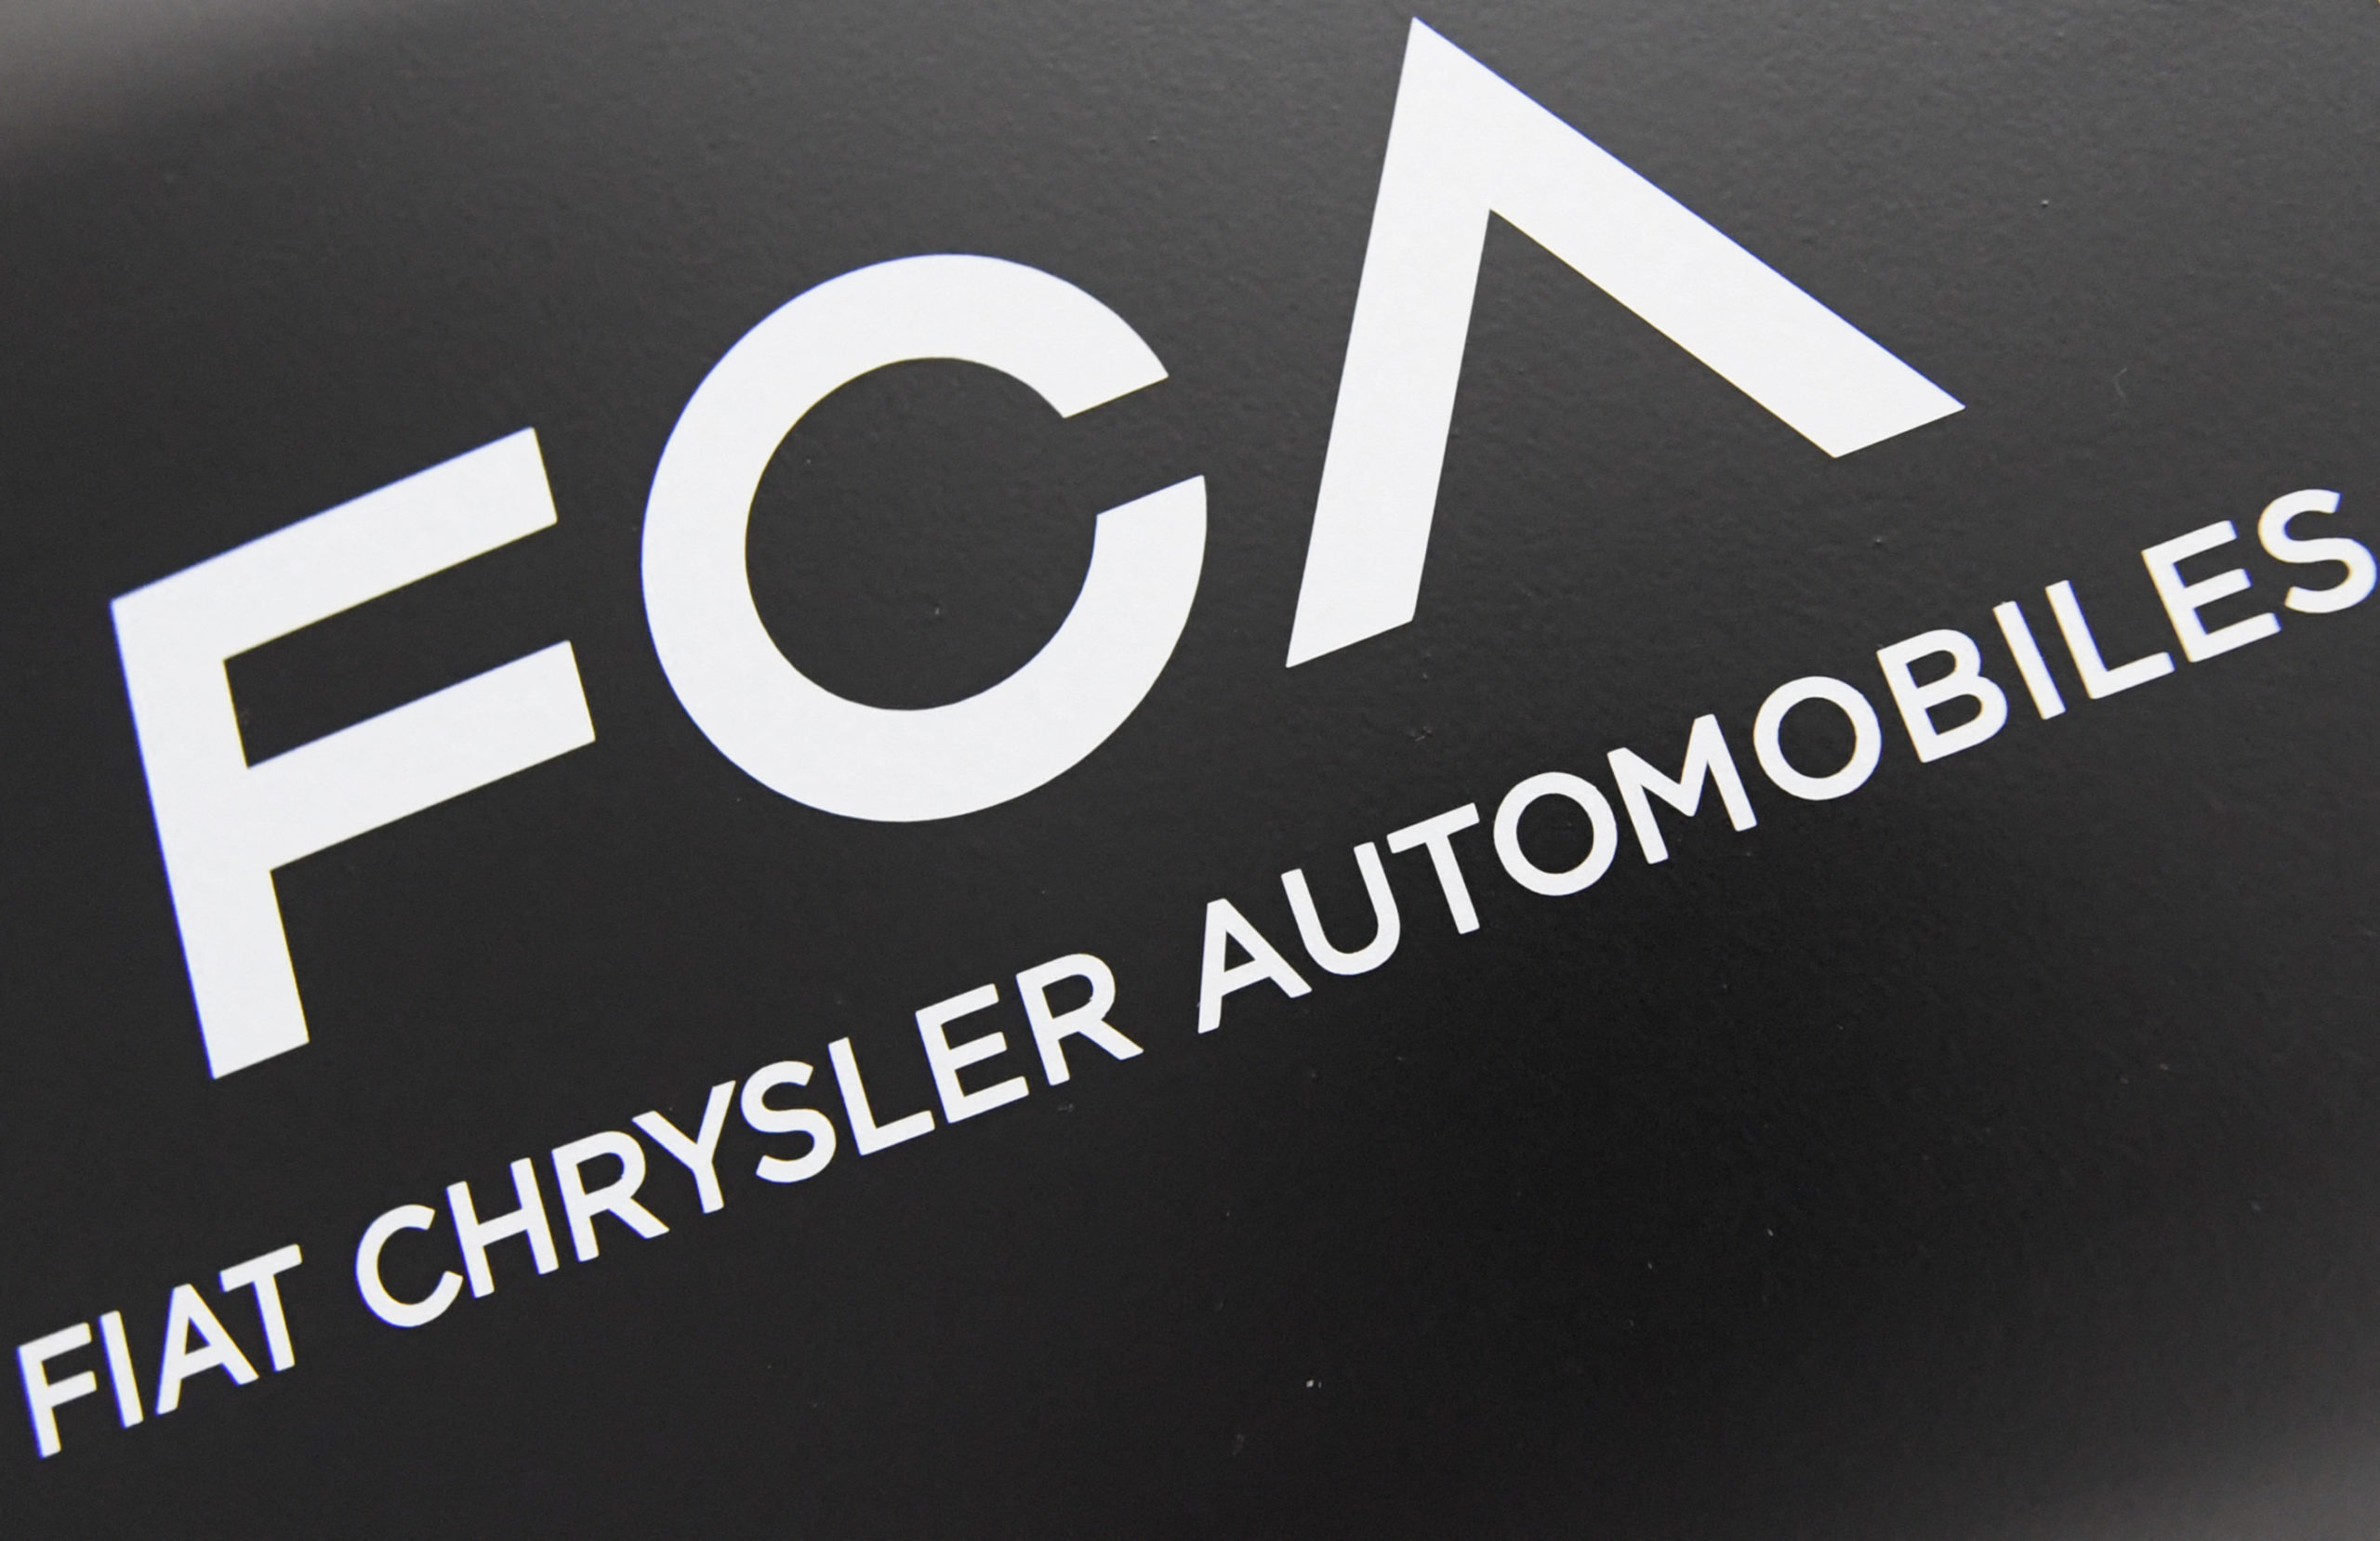 French dieselgate continues with FCA Italy under investigation